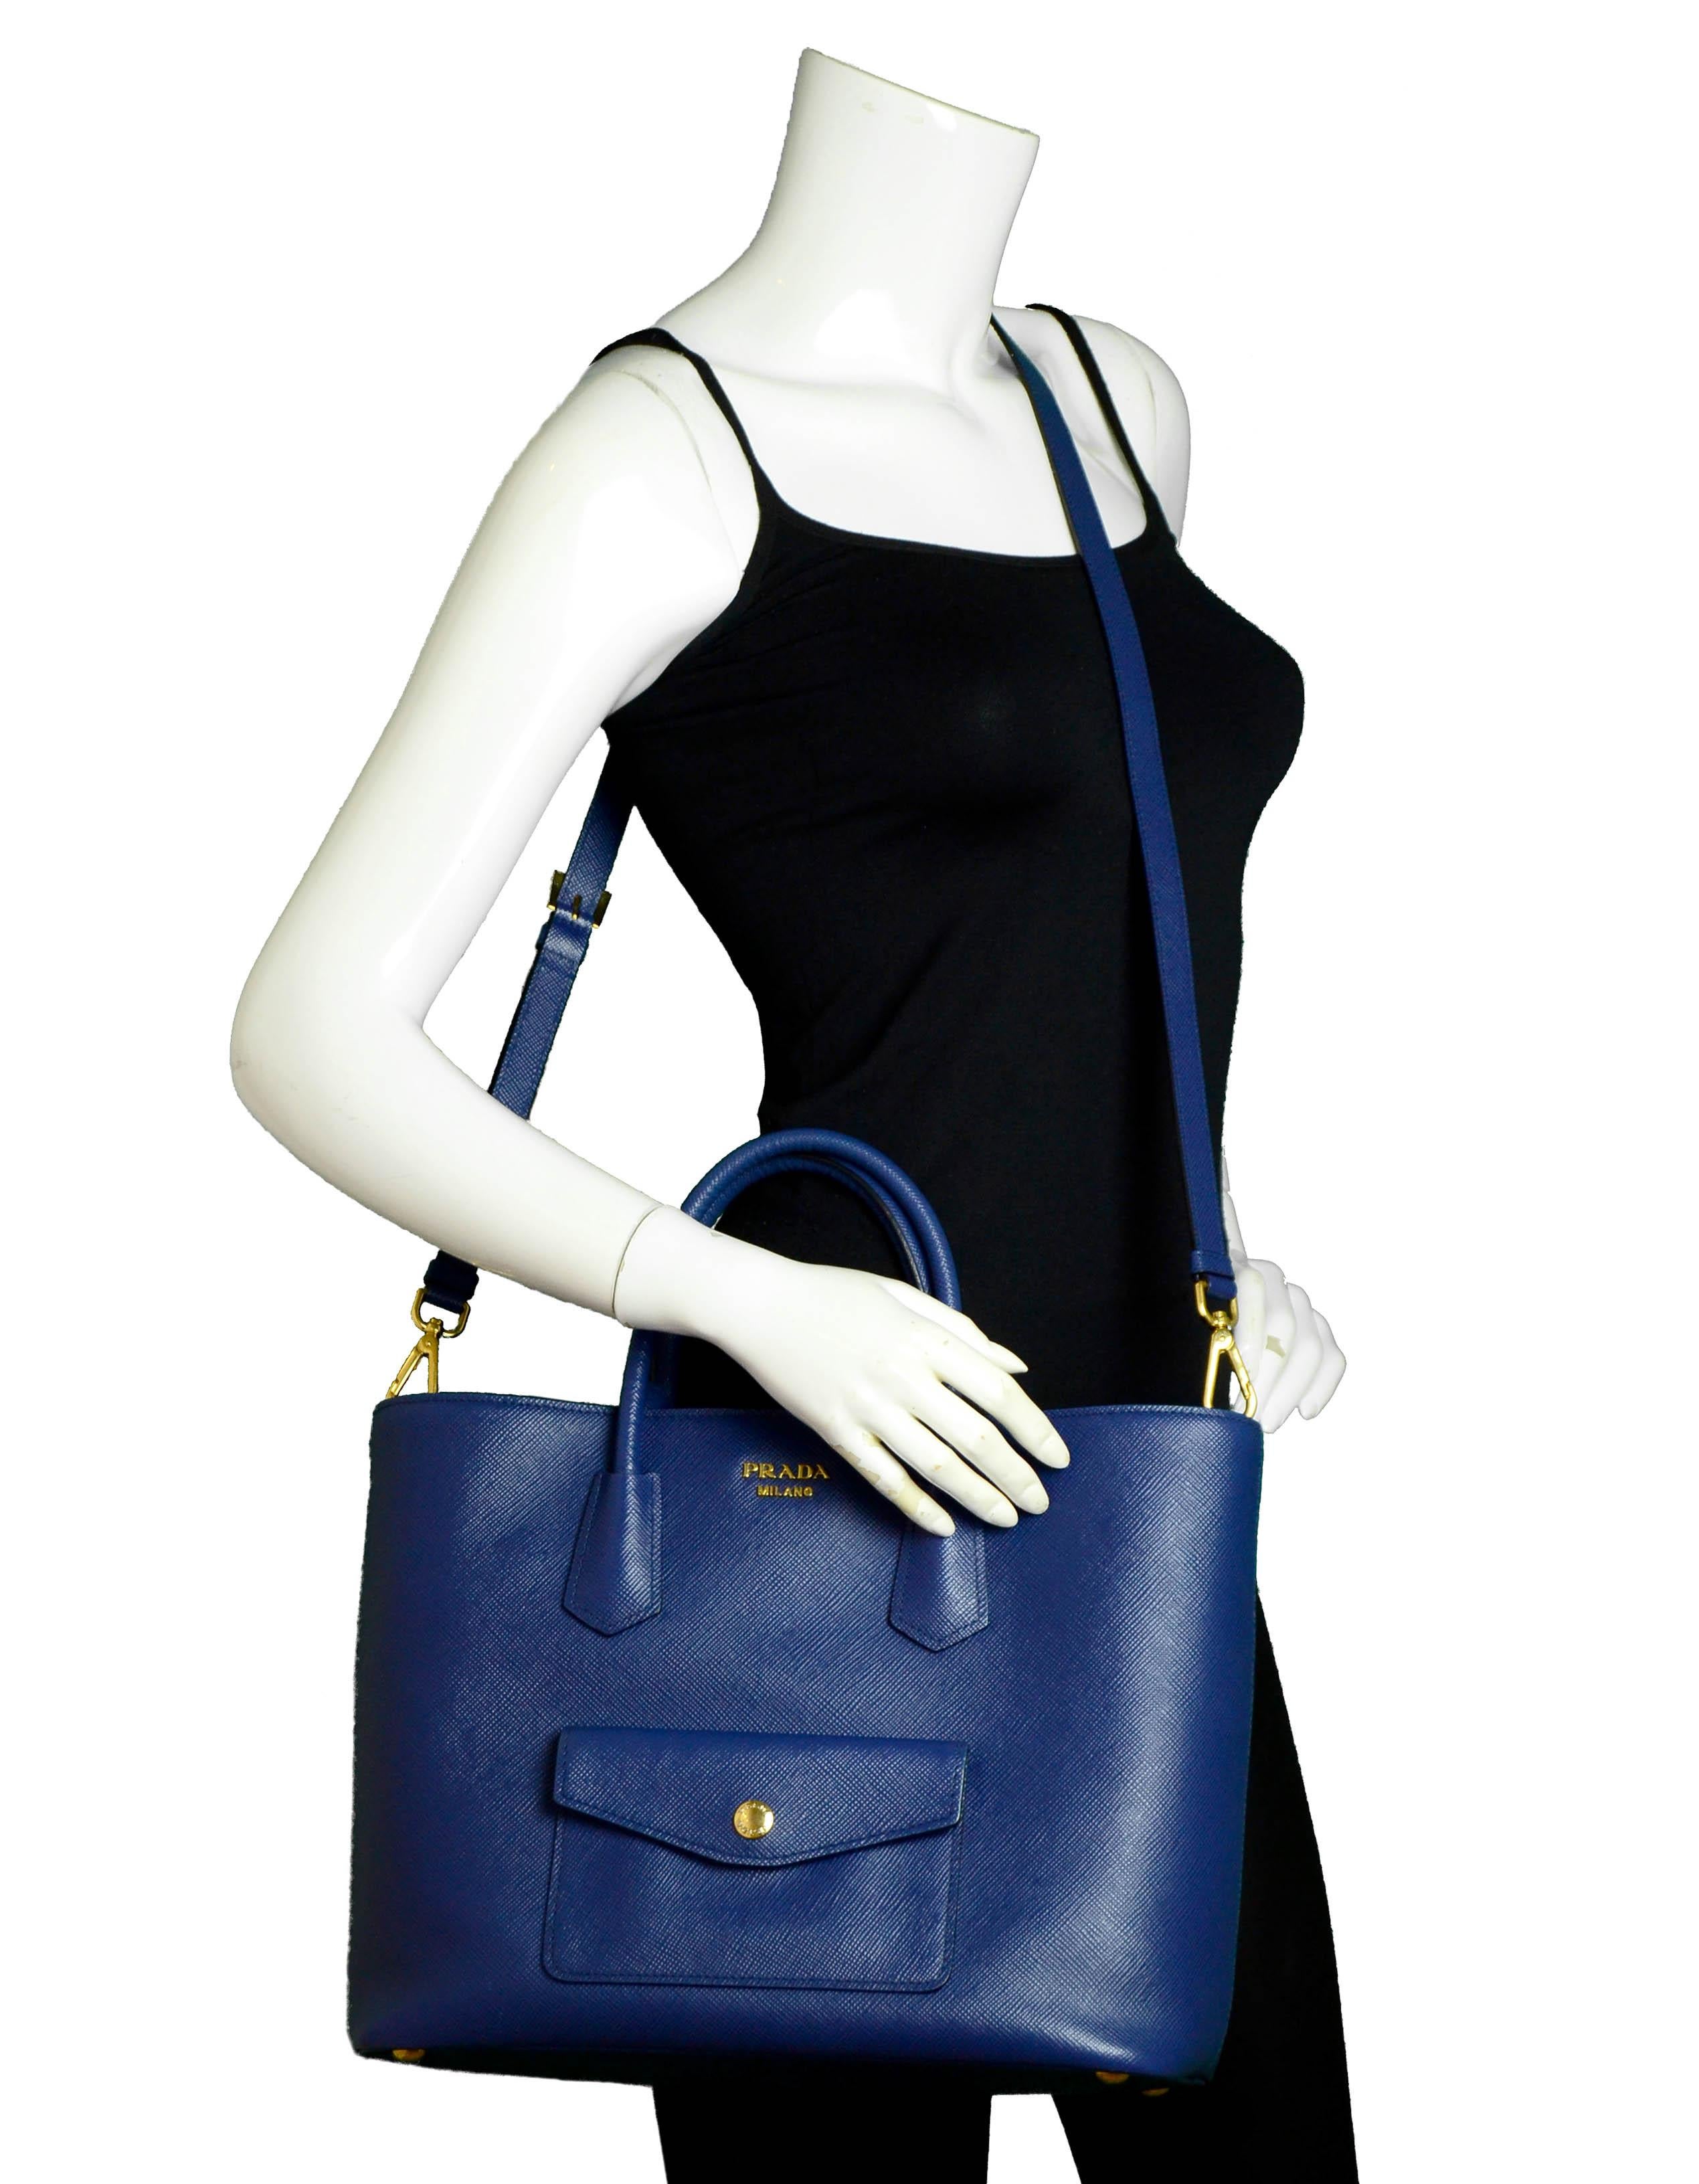 Prada Bluette Blue Saffiano Front Pocket Tote Bag w/ Detachable Strap

Made In: Italy
Year of Production:2014
Color: Bluette blue
Hardware: Goldtone
Materials: Saffiano leather
Lining: Smooth leather
Closure/Opening: Snap
Exterior Pockets: Flap